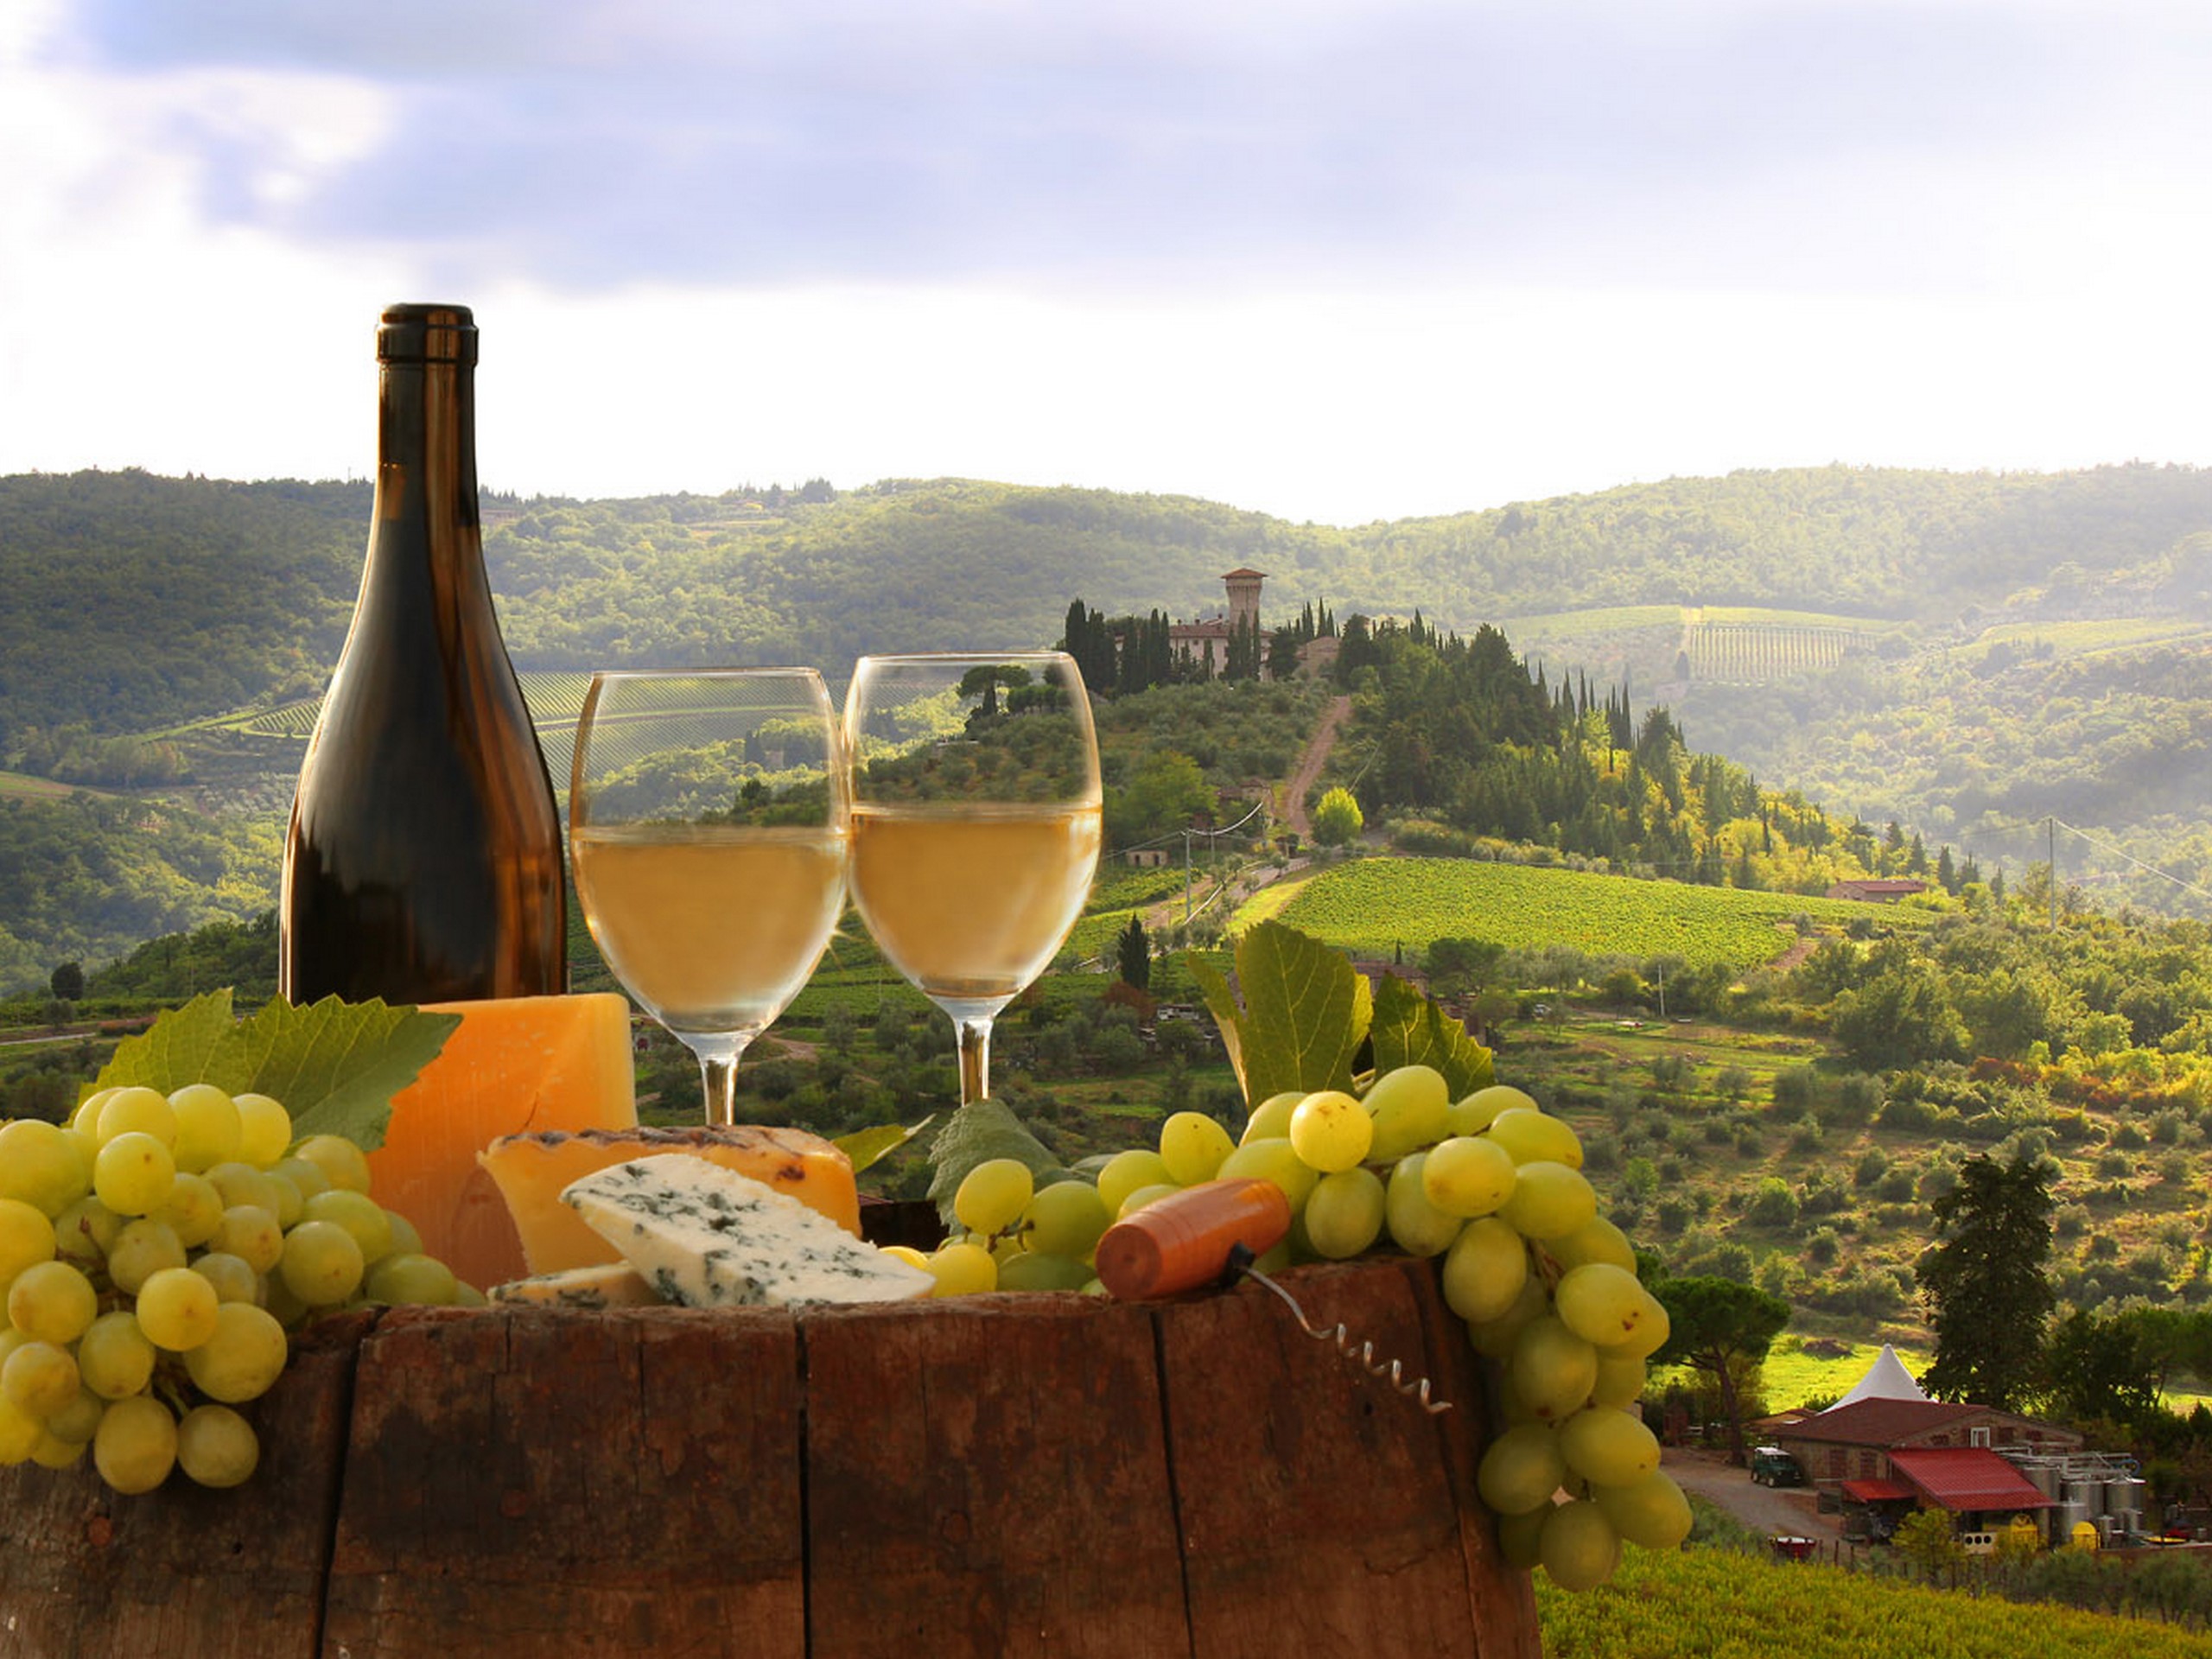 Wine and grapes with the background of the Italian Castle